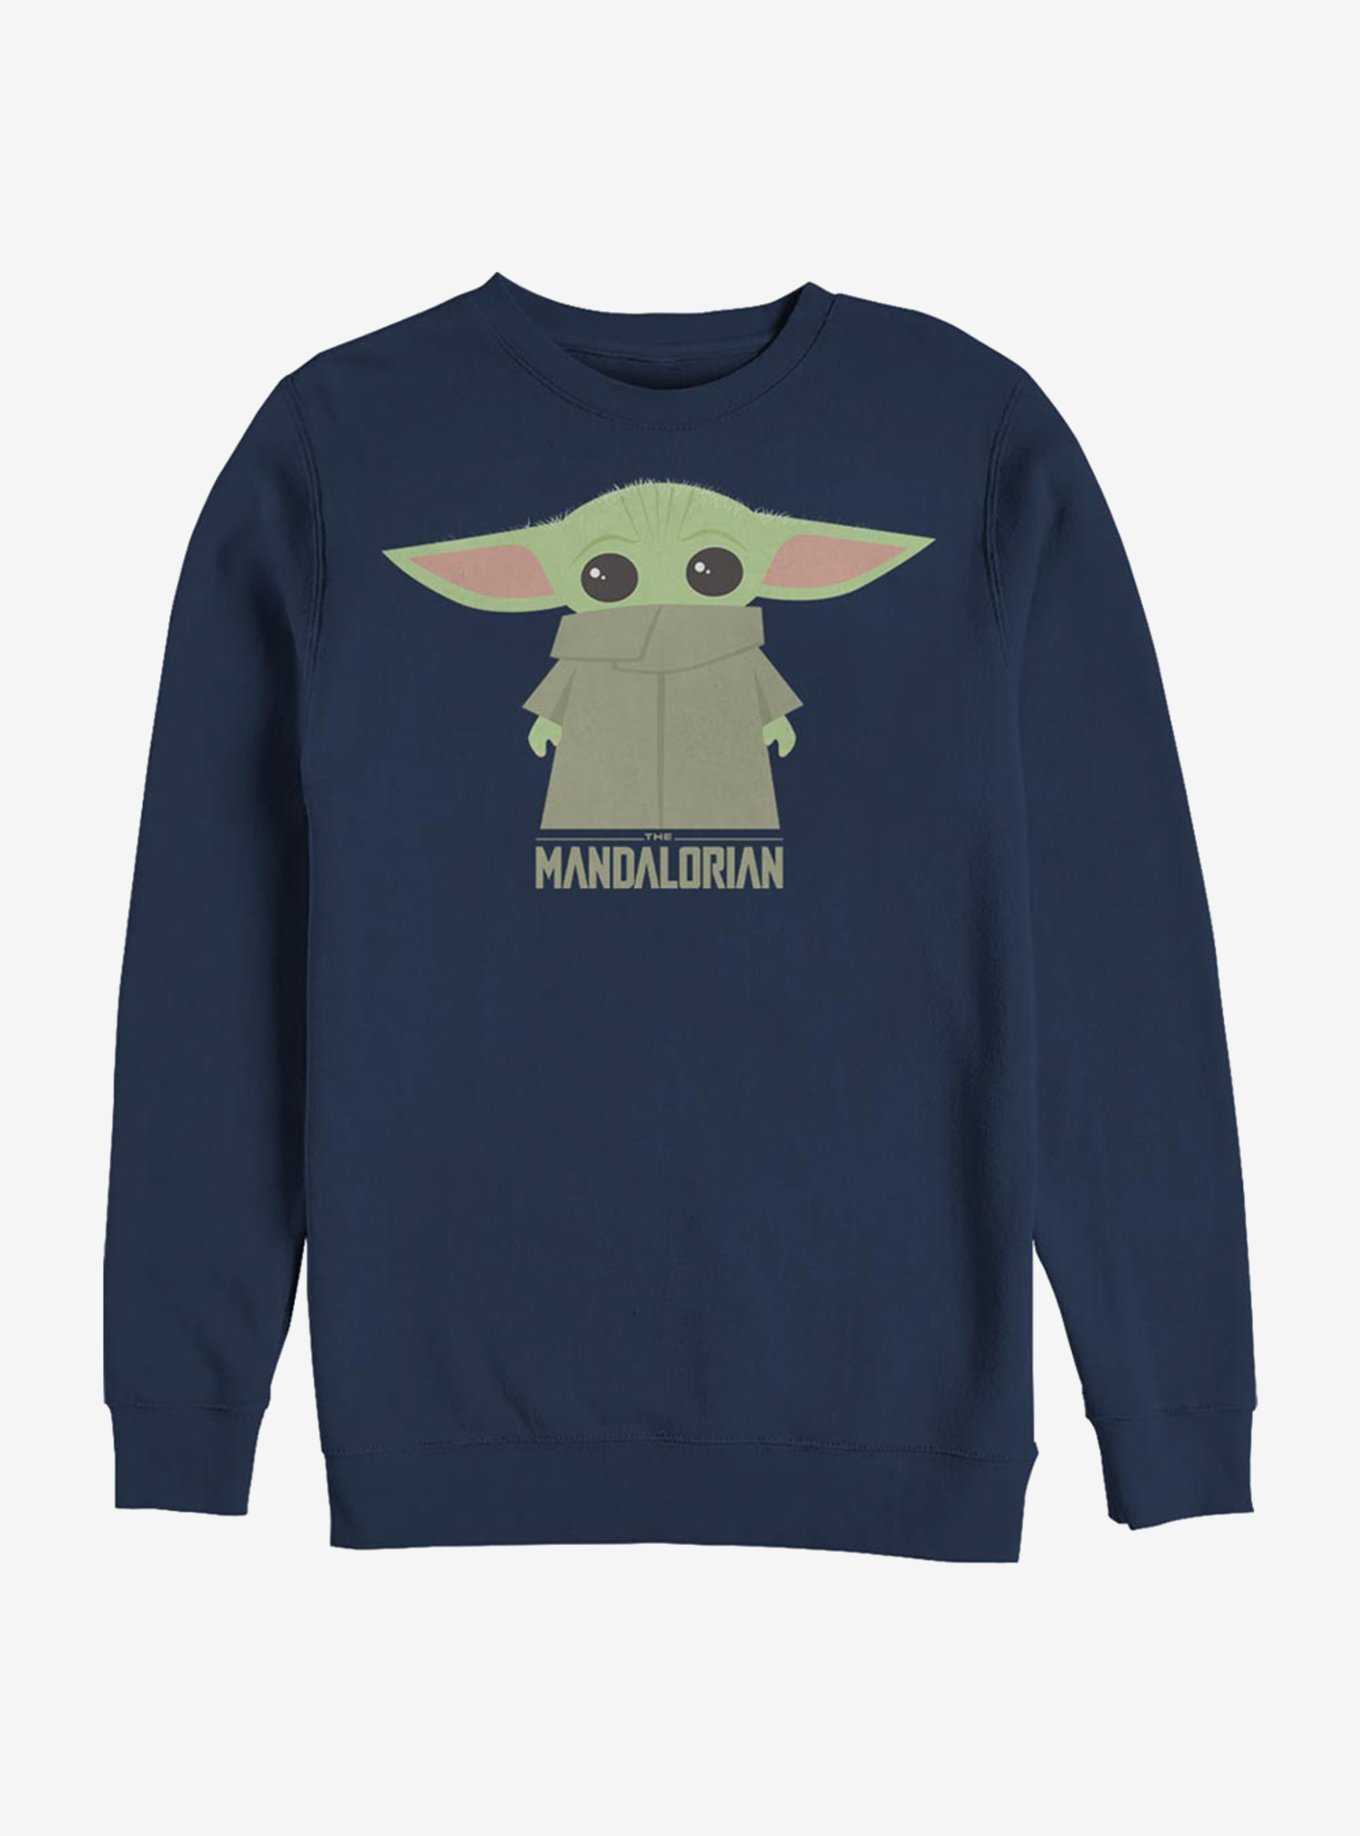 Star Wars The Mandalorian The Child Covered Face Crew Sweatshirt, , hi-res